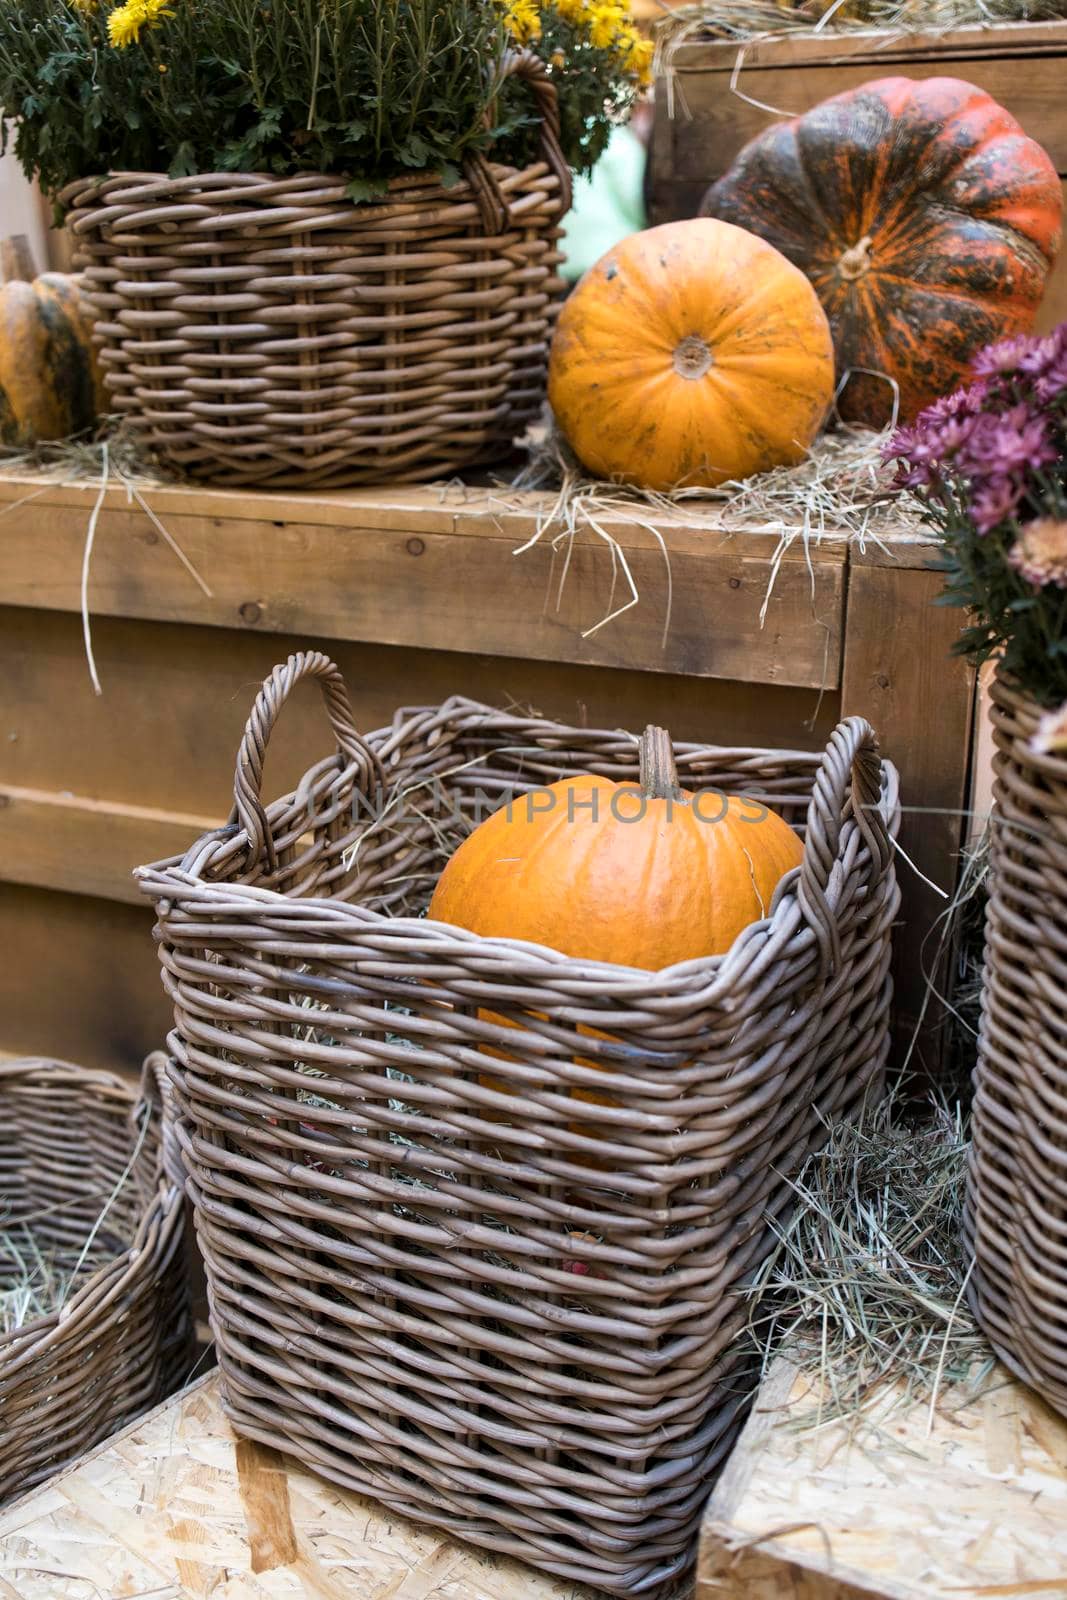 Colorful chrysanthemums in a wicker basket, pumpkins - Halloween decorations.